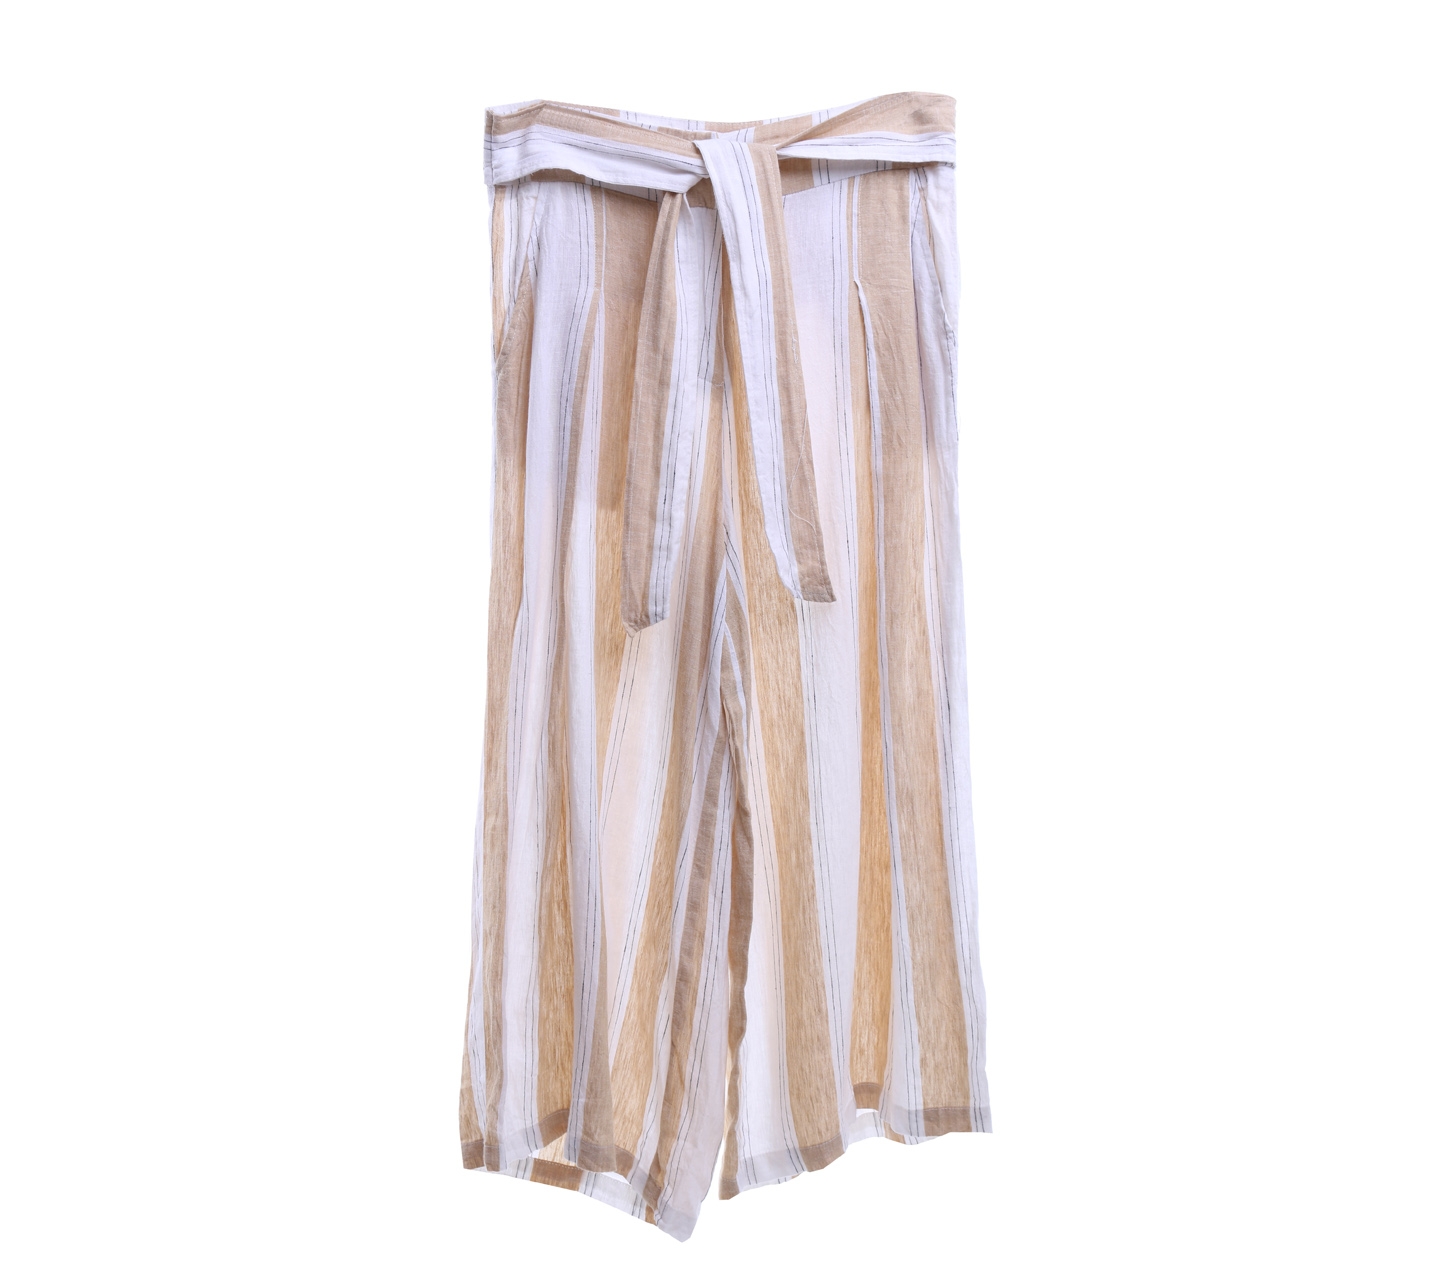 Glassons White And Brown Striped Culottes Long Pants